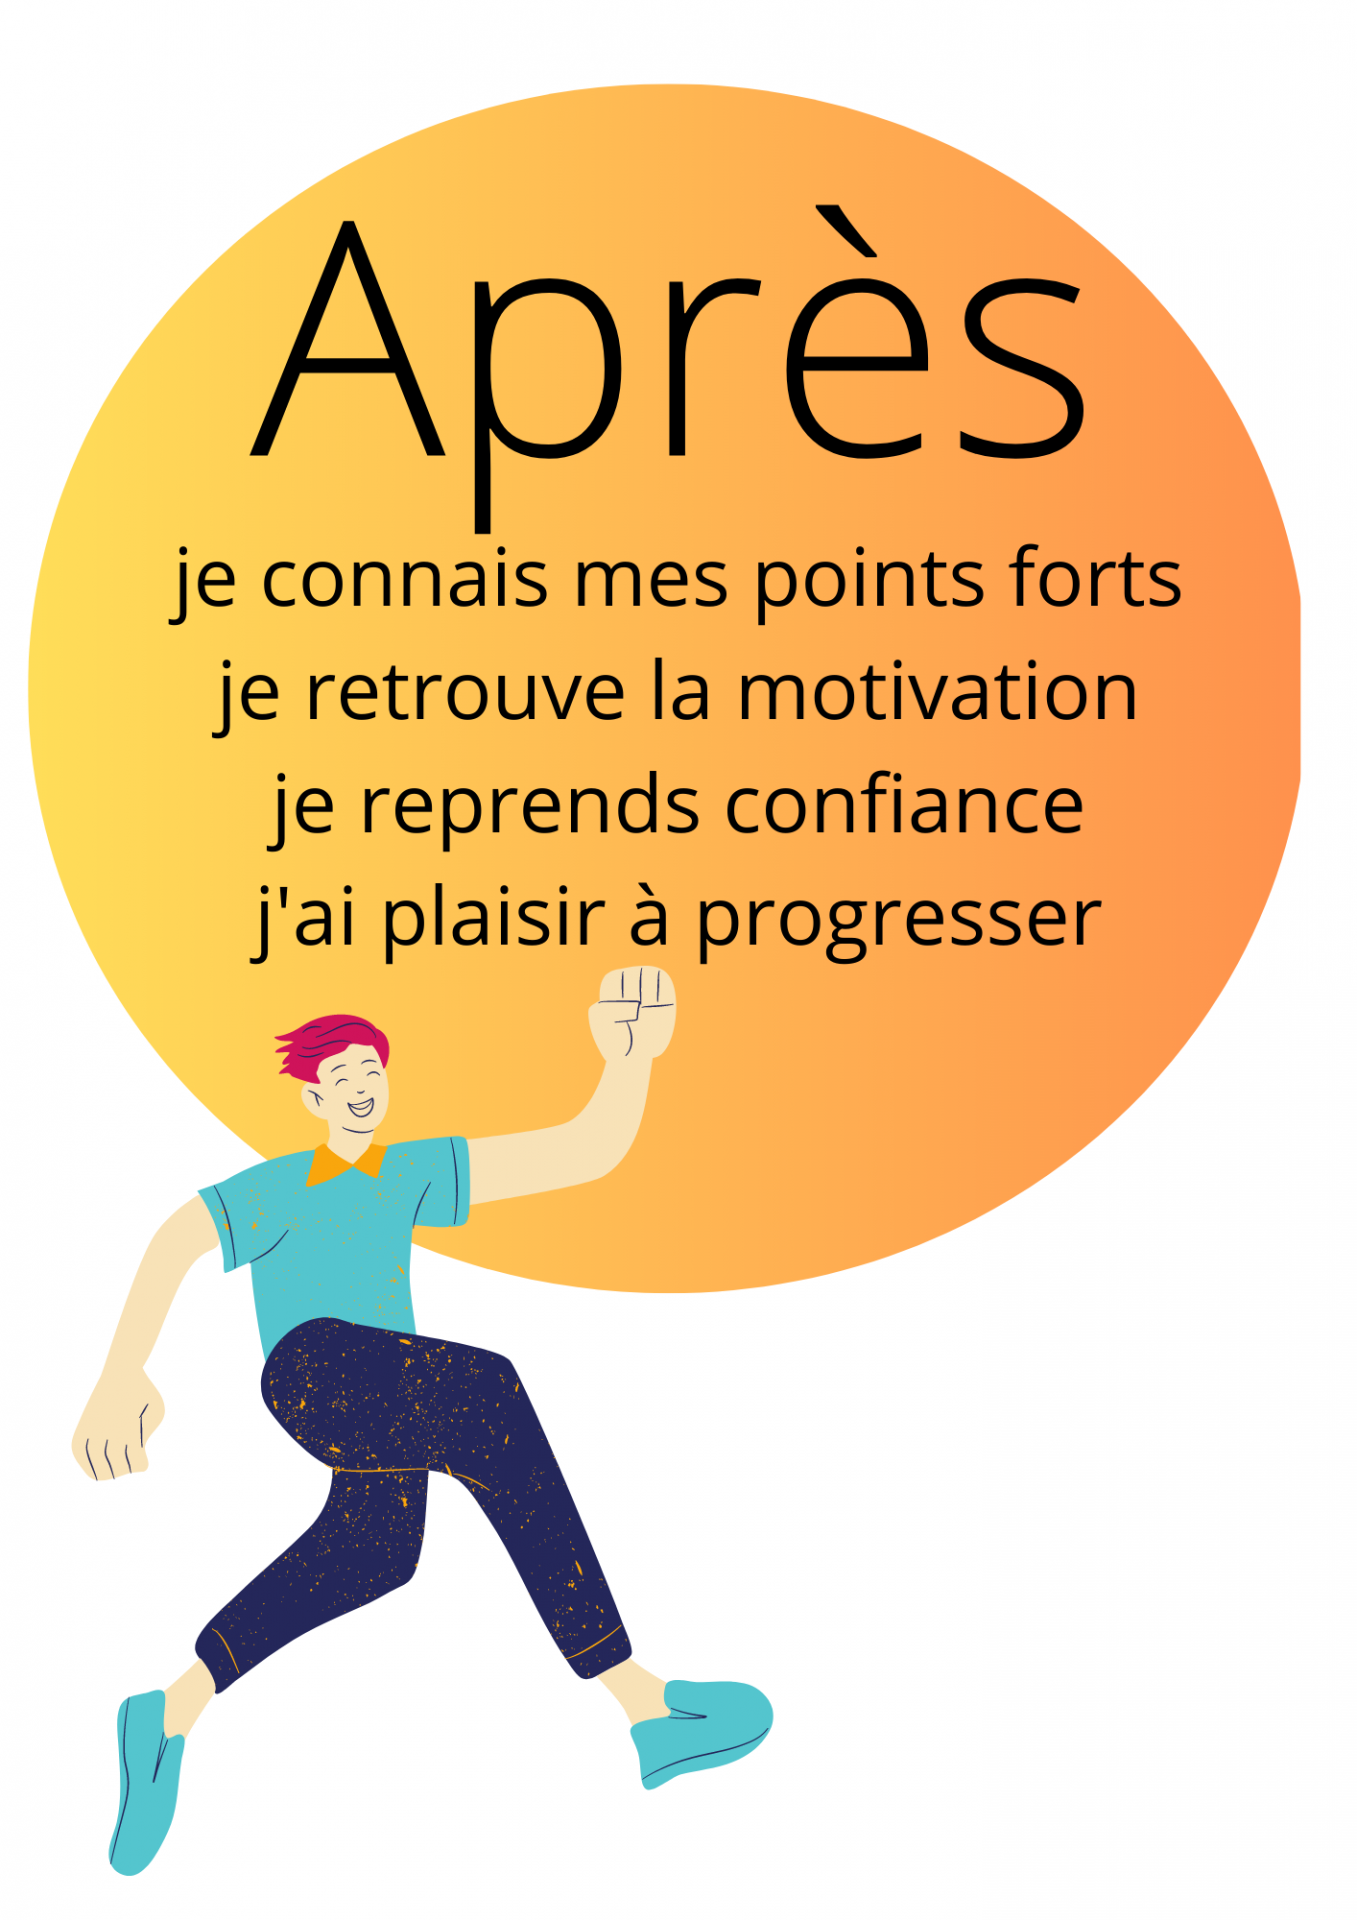 Apres points forts 3